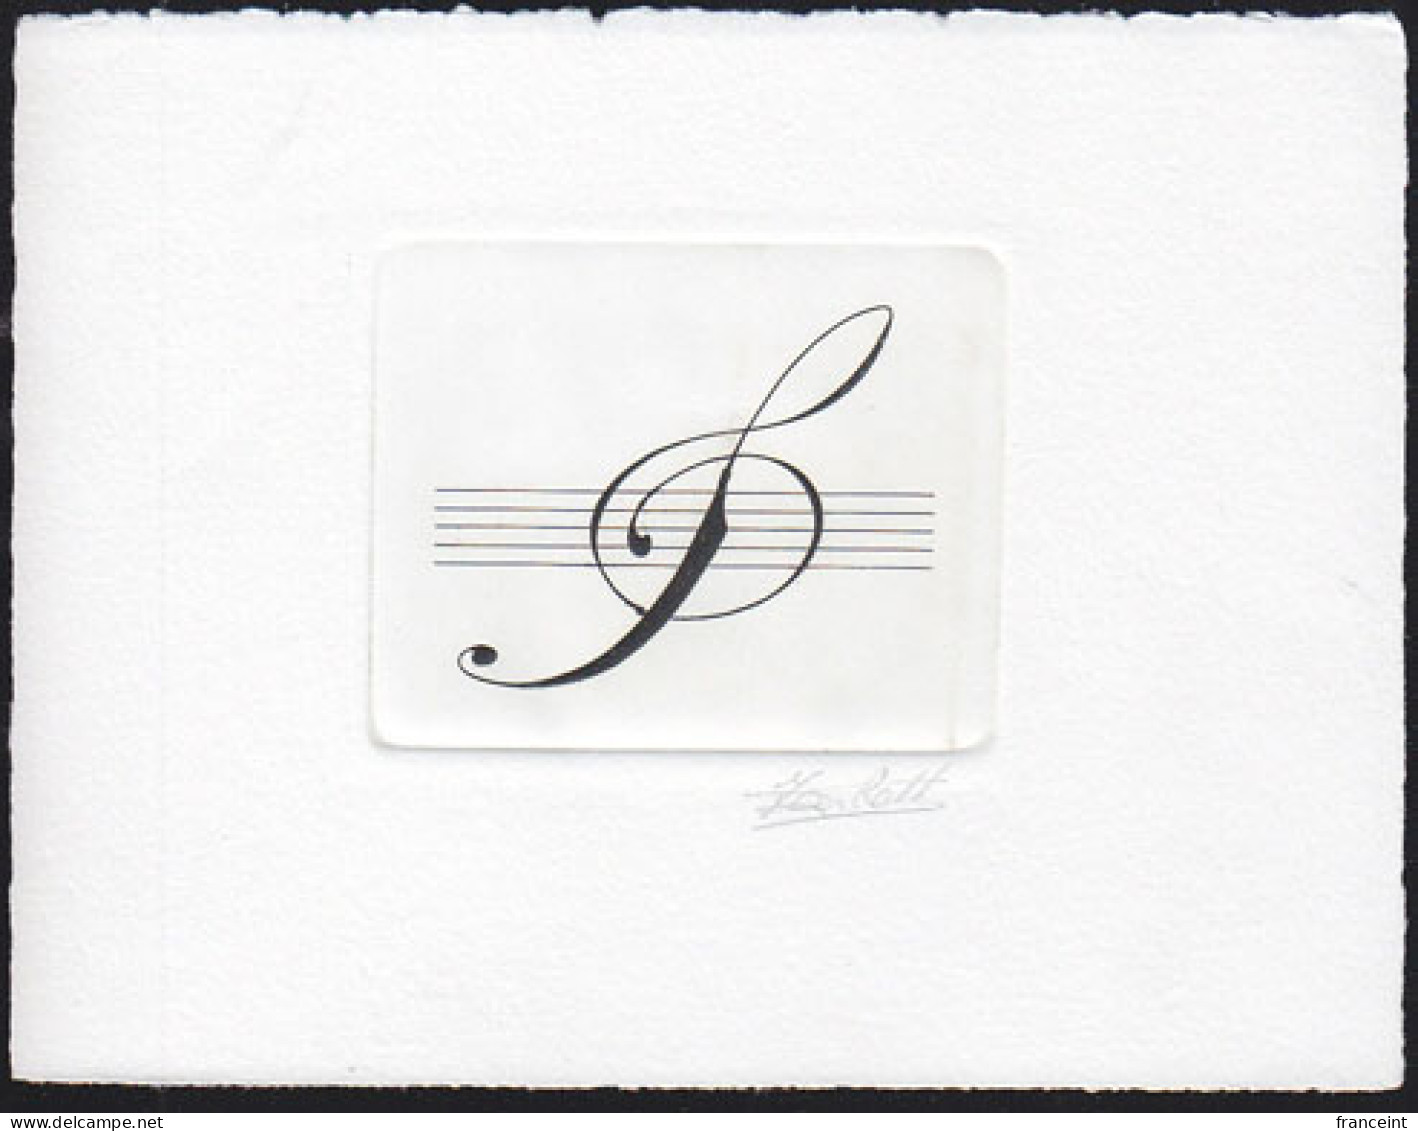 BELGIUM(1989) Treble Clef. Die Proof In Black Signed By The Engraver, Representing The FDC Cachet. Scott No B1088. - Proeven & Herdruk